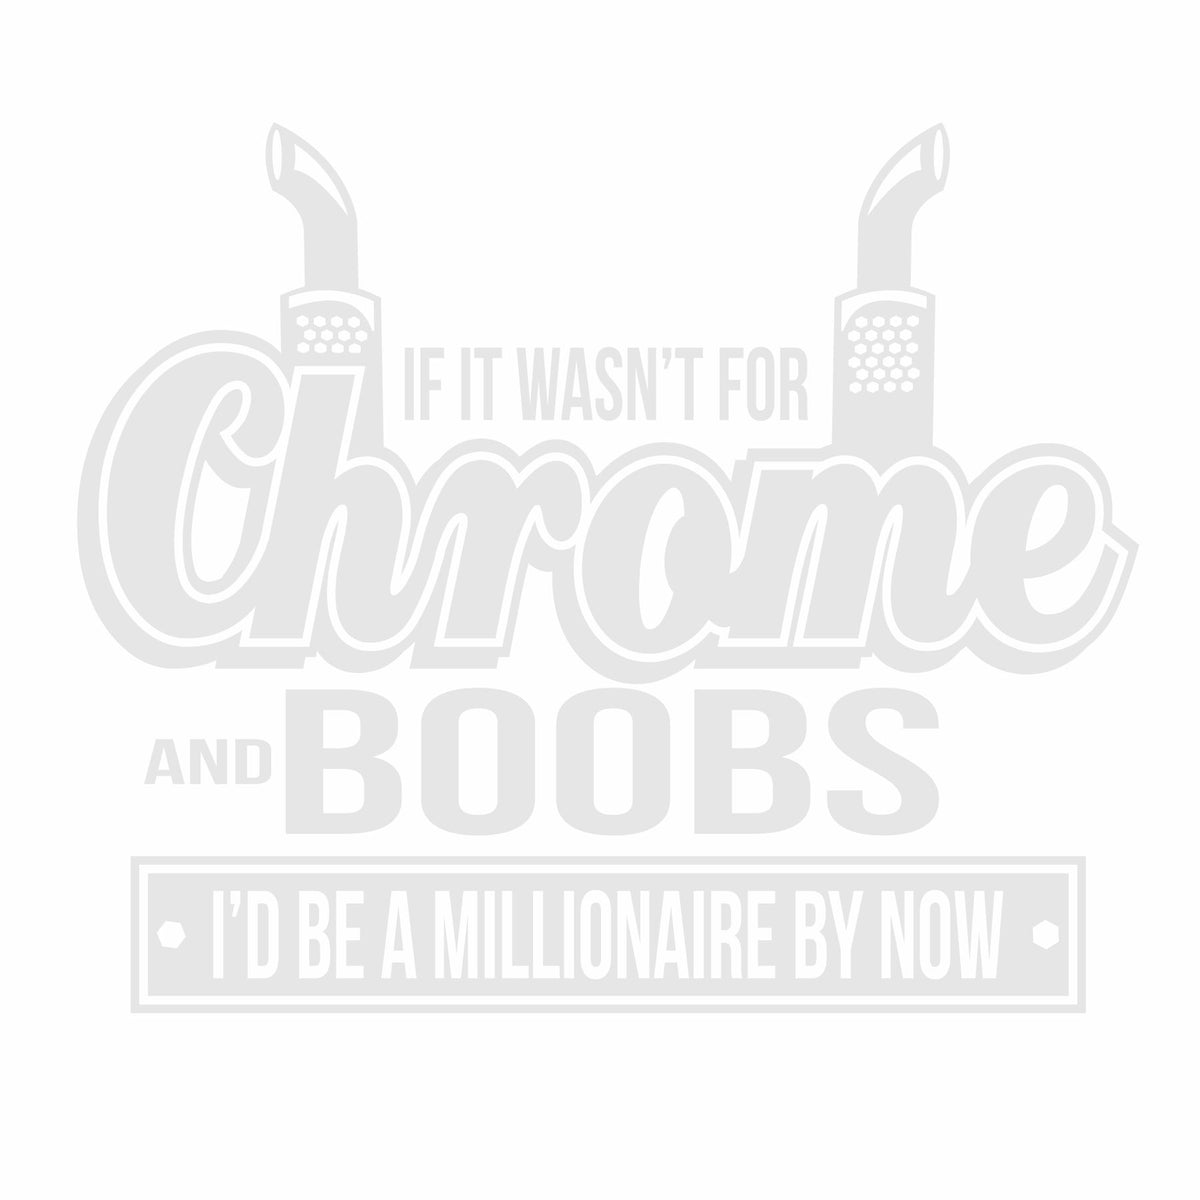 Chrome and Boobs Vinyl Decal - Free Shipping